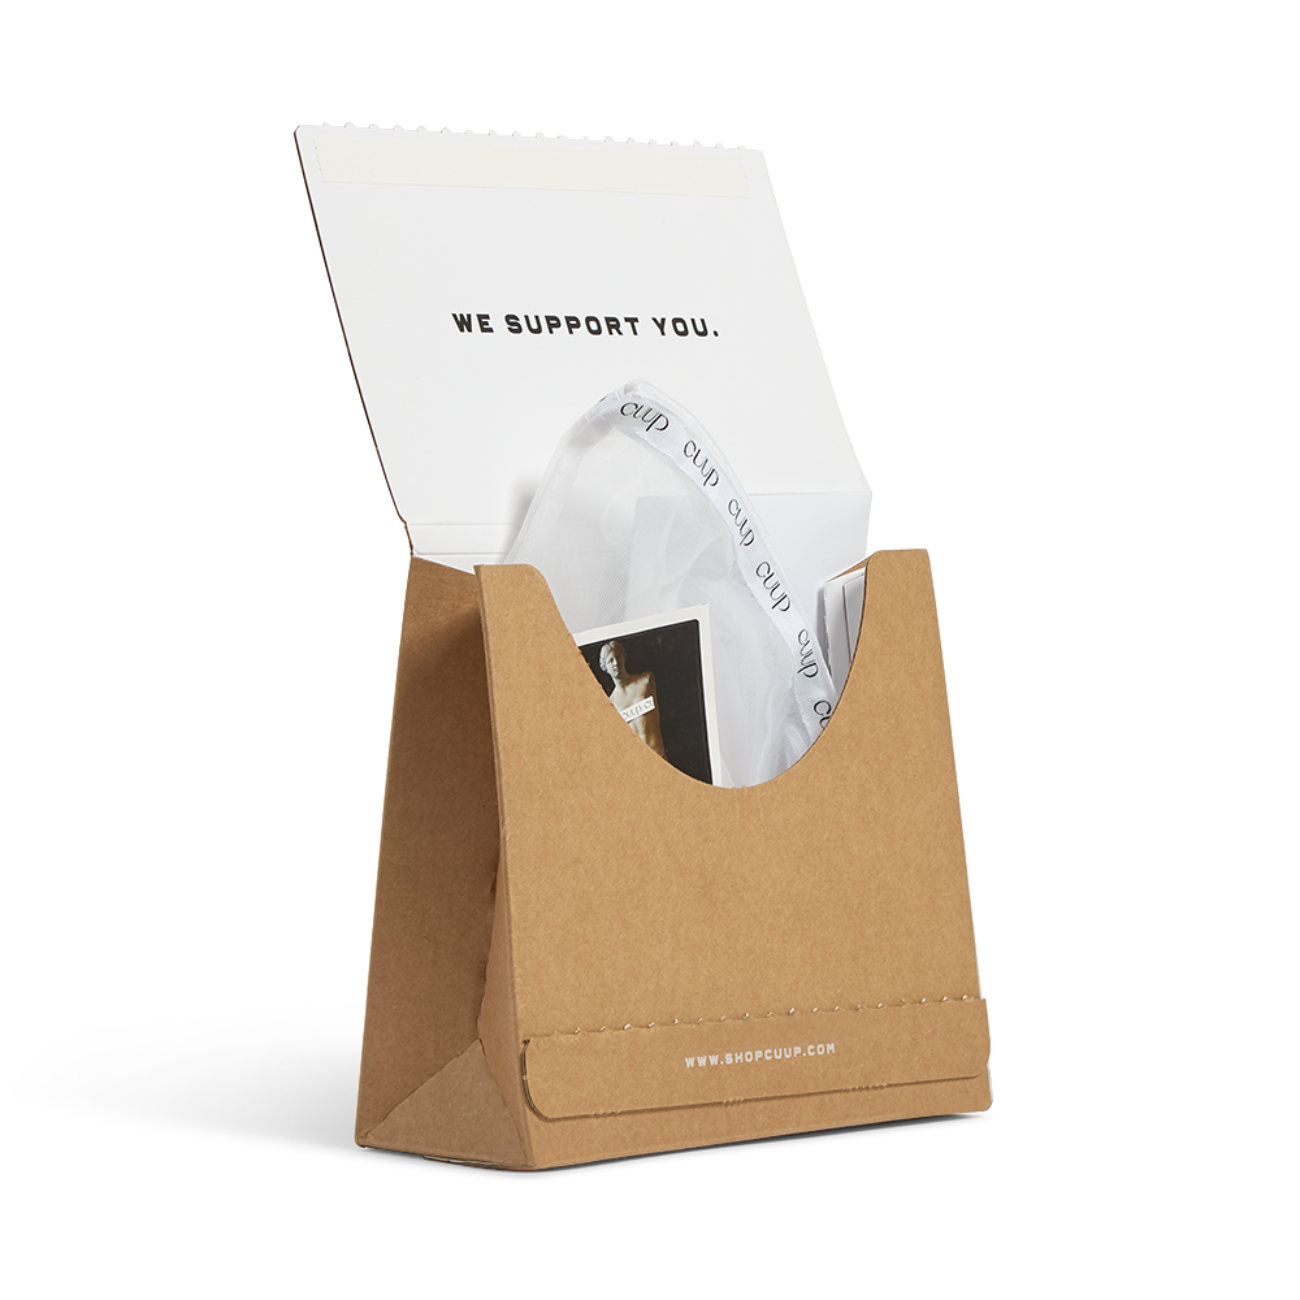 Custom corrugated mailer box for Cuup with tear strip. Flexography on natural kraft liner.